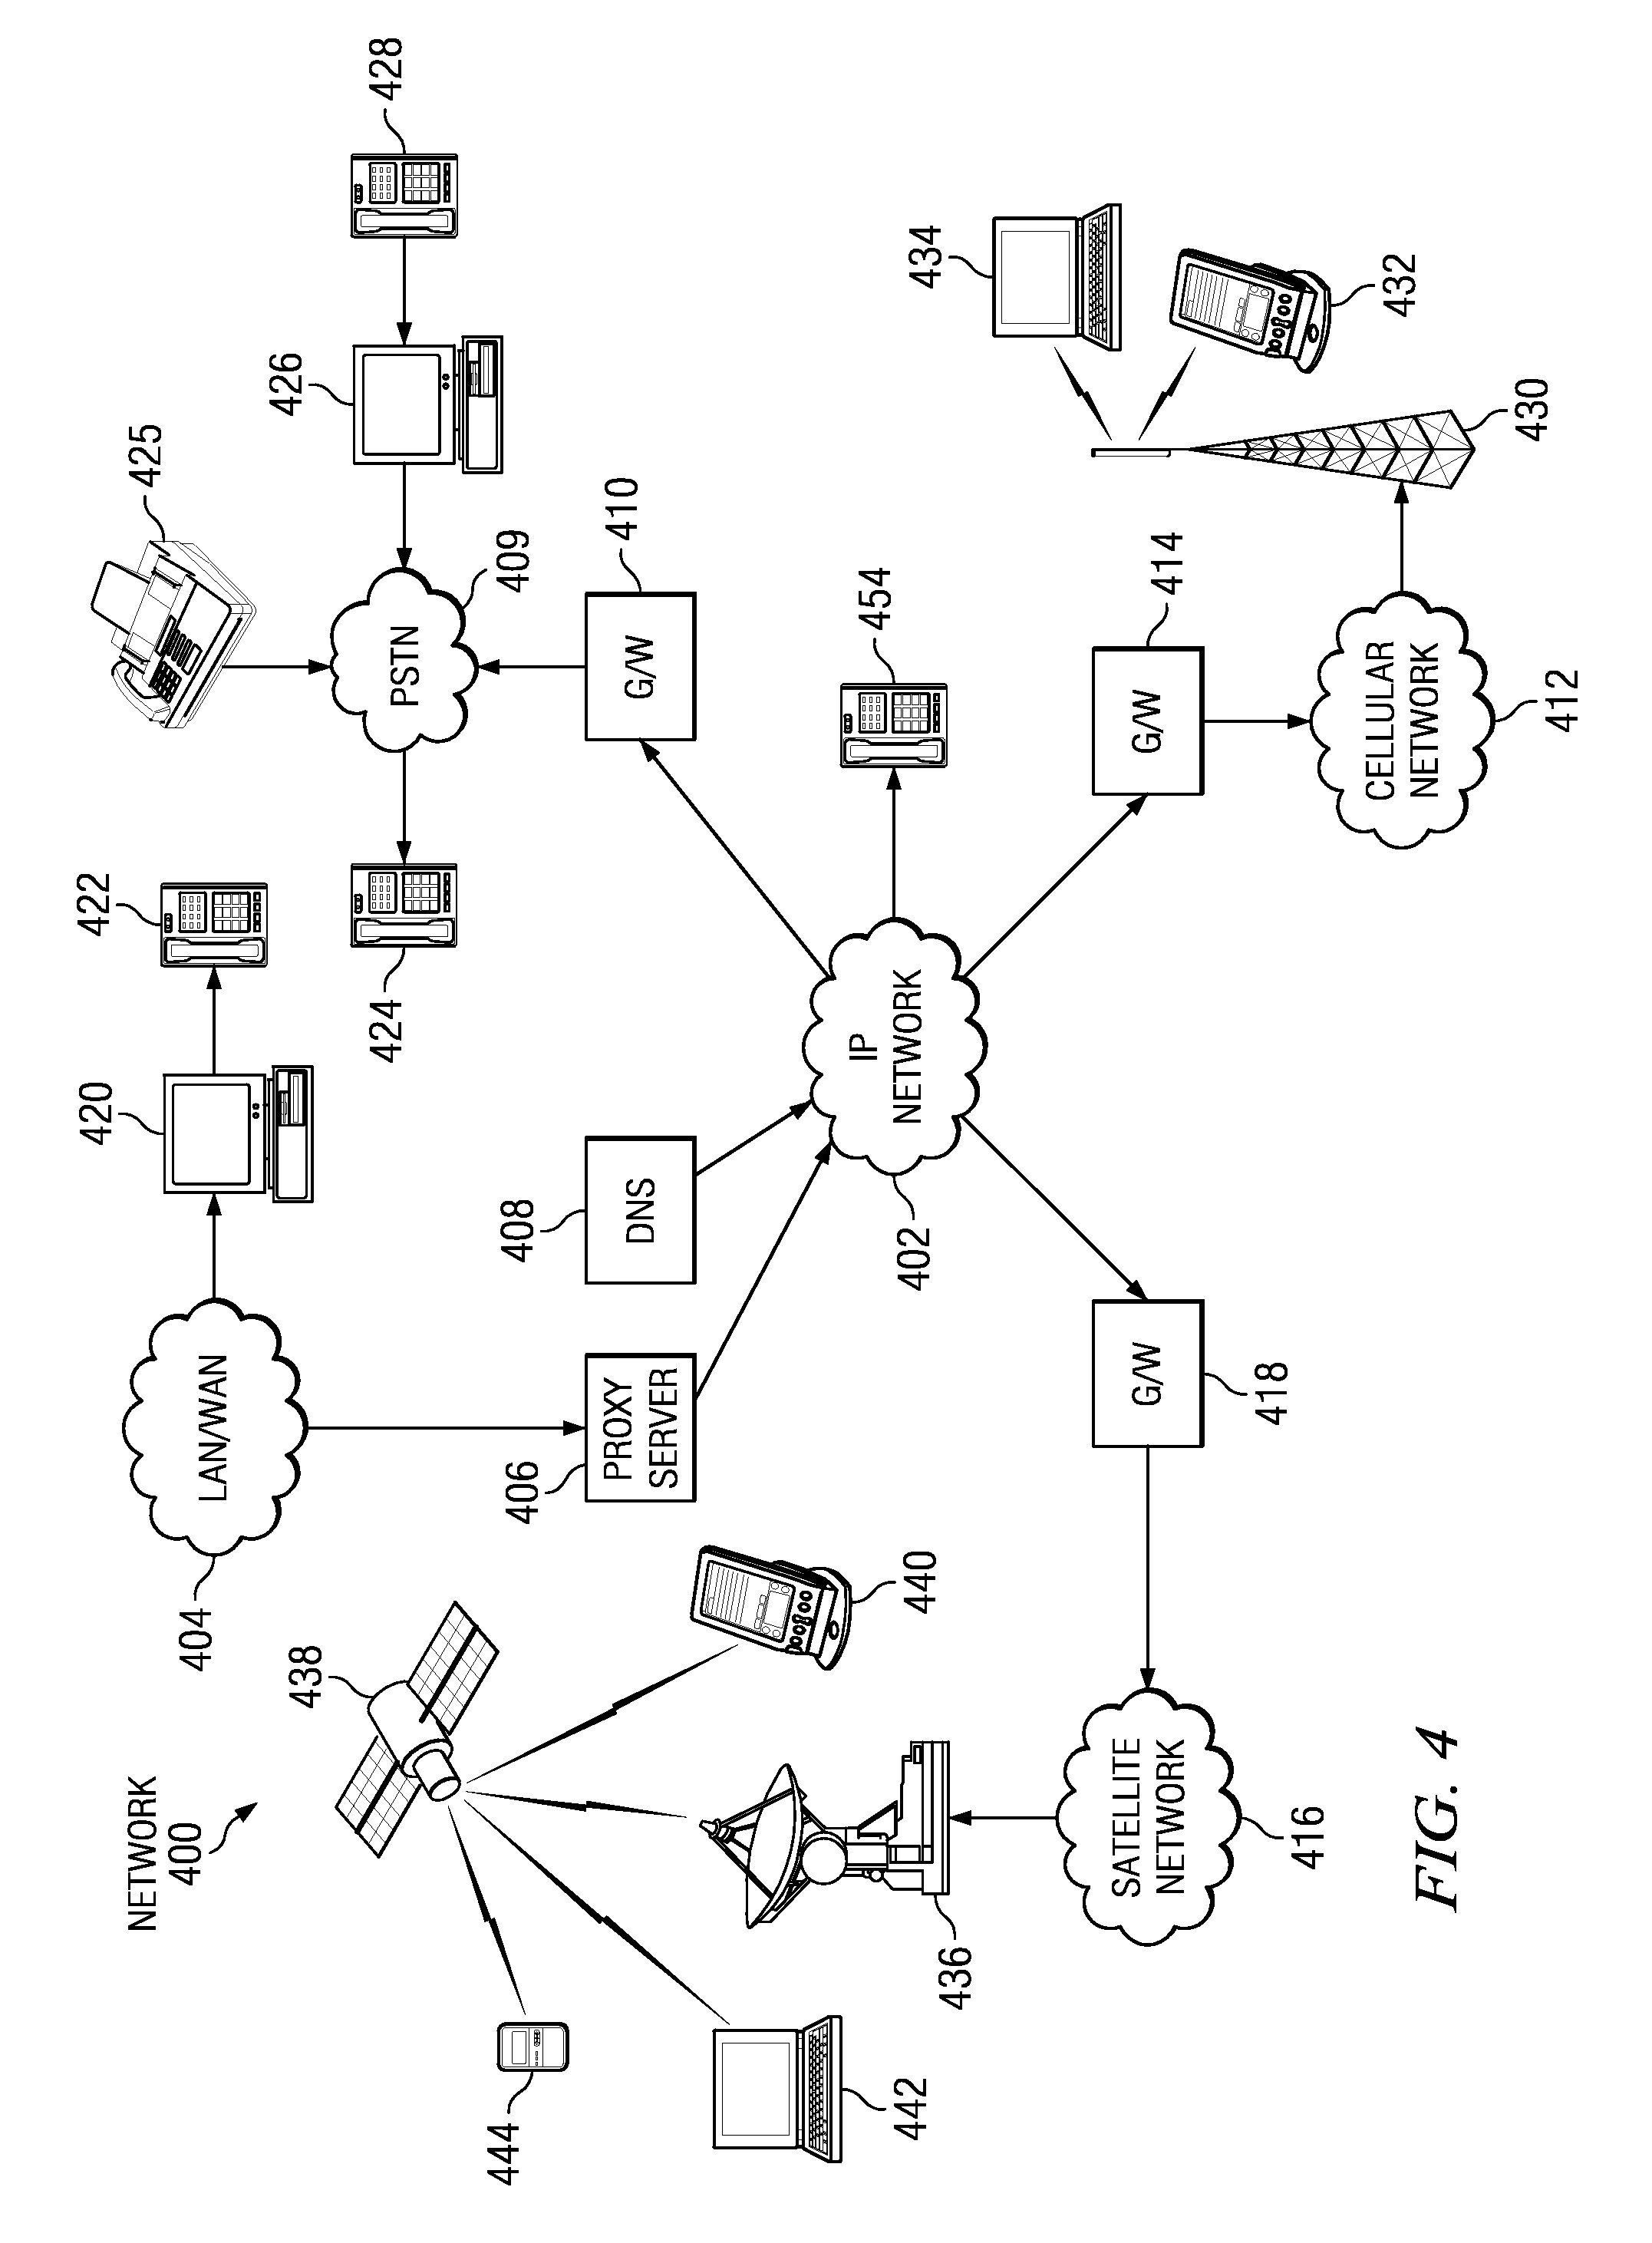 N-ways conference system using only participants' telephony devices without external conference server